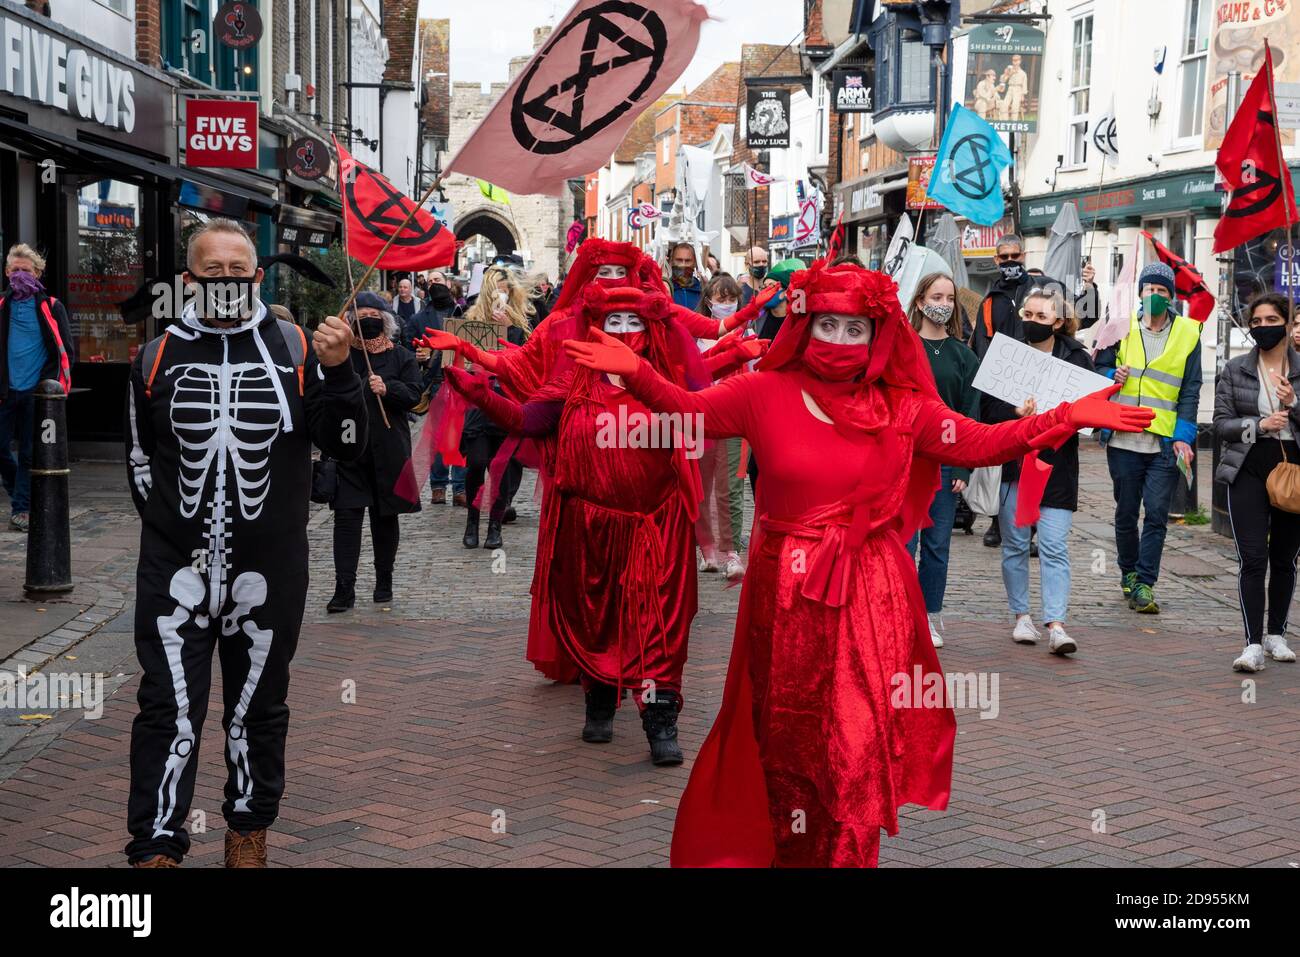 Canterbury, UK. 31st October 2020. Extinction Rebellion Procession led by the Red Rebels via Westgate Towers through the centre of Canterbury along the pedestrianised High Street. A new Day of the Dead spectacle in the city involving music, skeletal animals, and the mourning and solace of the Red Rebels. XR say there is a need to call on the government and institutions to Tell The Truth about the climate and ecological crises that we are in and Act Now and get behind the CEE bill. Hosted by Extinction Rebellion Canterbury and Extinction Rebellion Southeast UK. Credit: Stephen Bell/Alamy Stock Photo